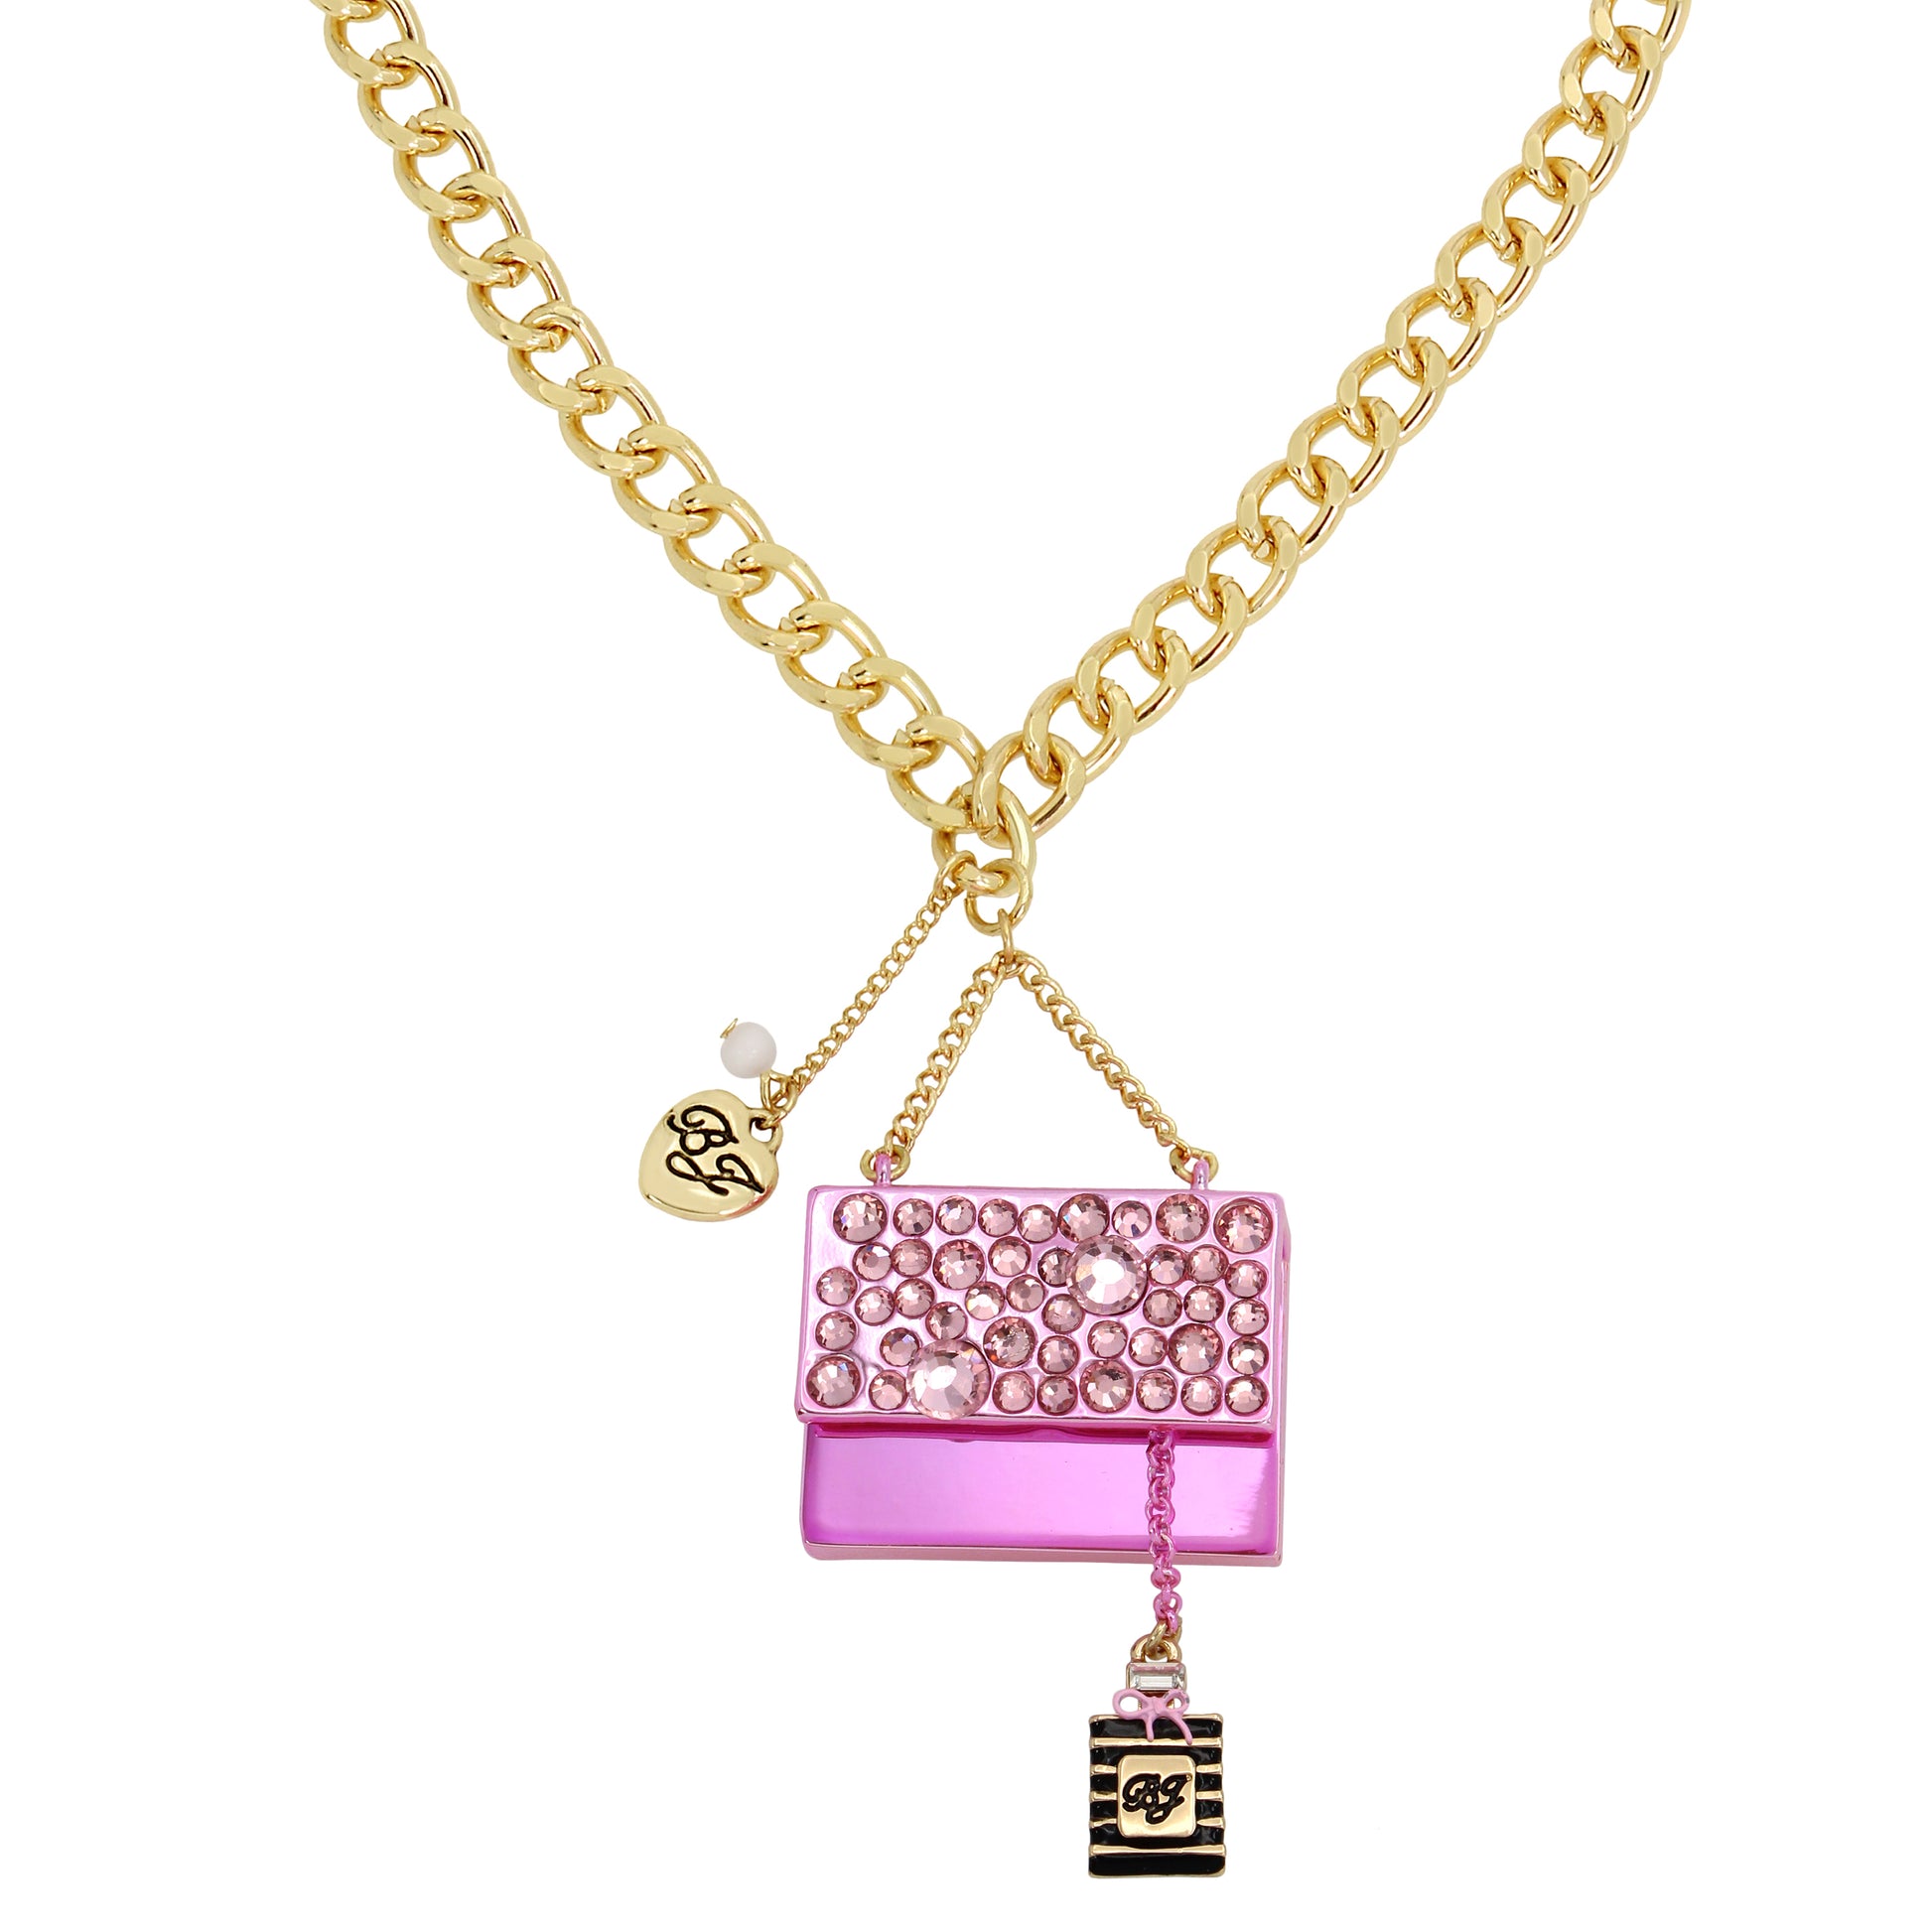 Betsey Johnson Going All Out Purse Pendant Necklace